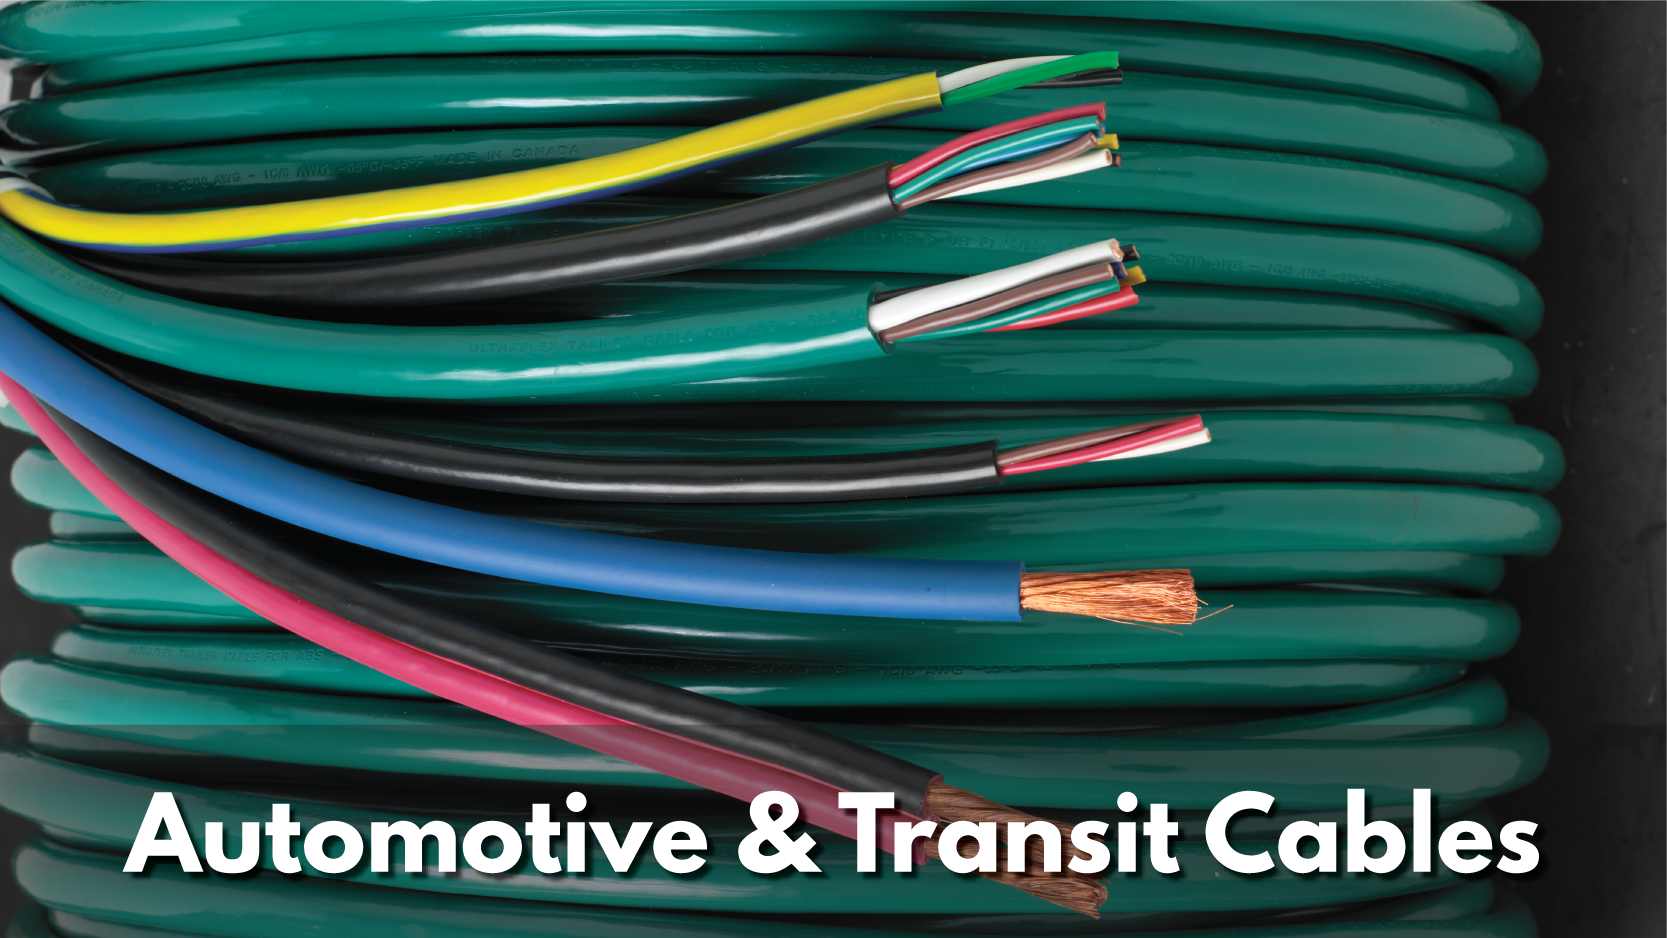 Texcan - View All Products - Automotive & Transit Cables